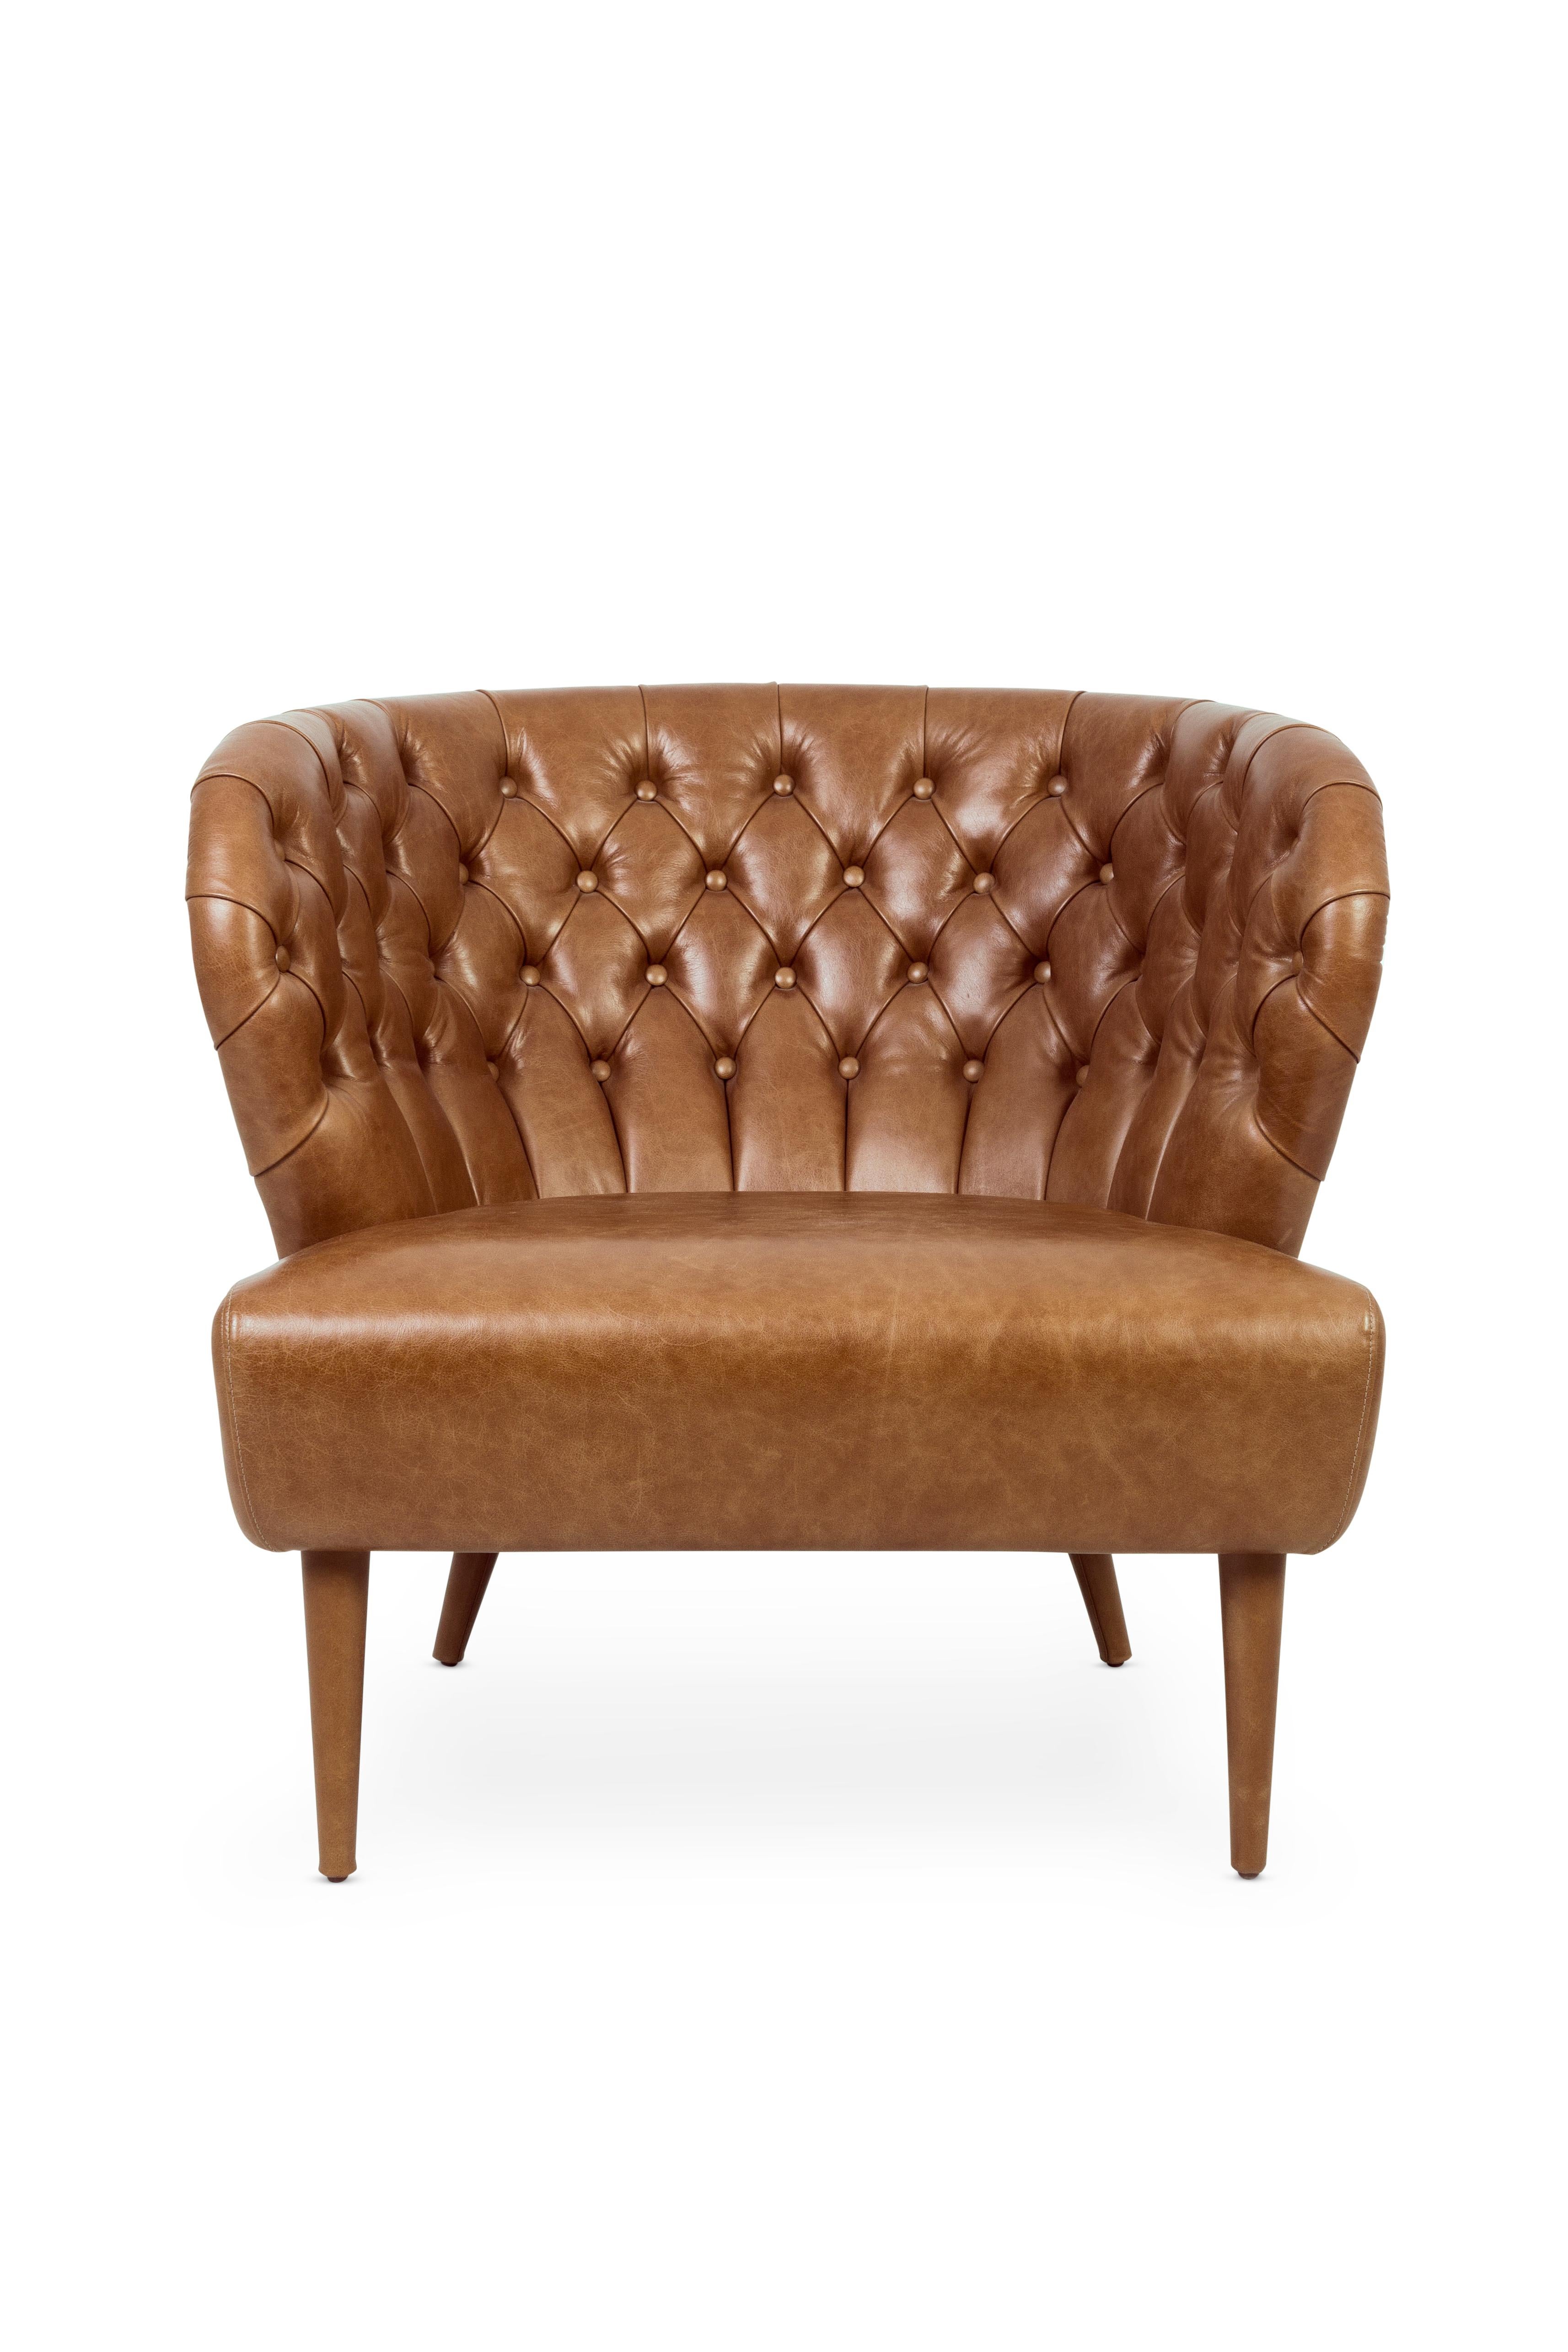 Fado expertly combines aesthetics and comfort, resulting in a maximized level of functionality. But what truly sets this armchair apart is its updated version of the iconic capitoné armchair - handmade with the utmost attention to detail, making it